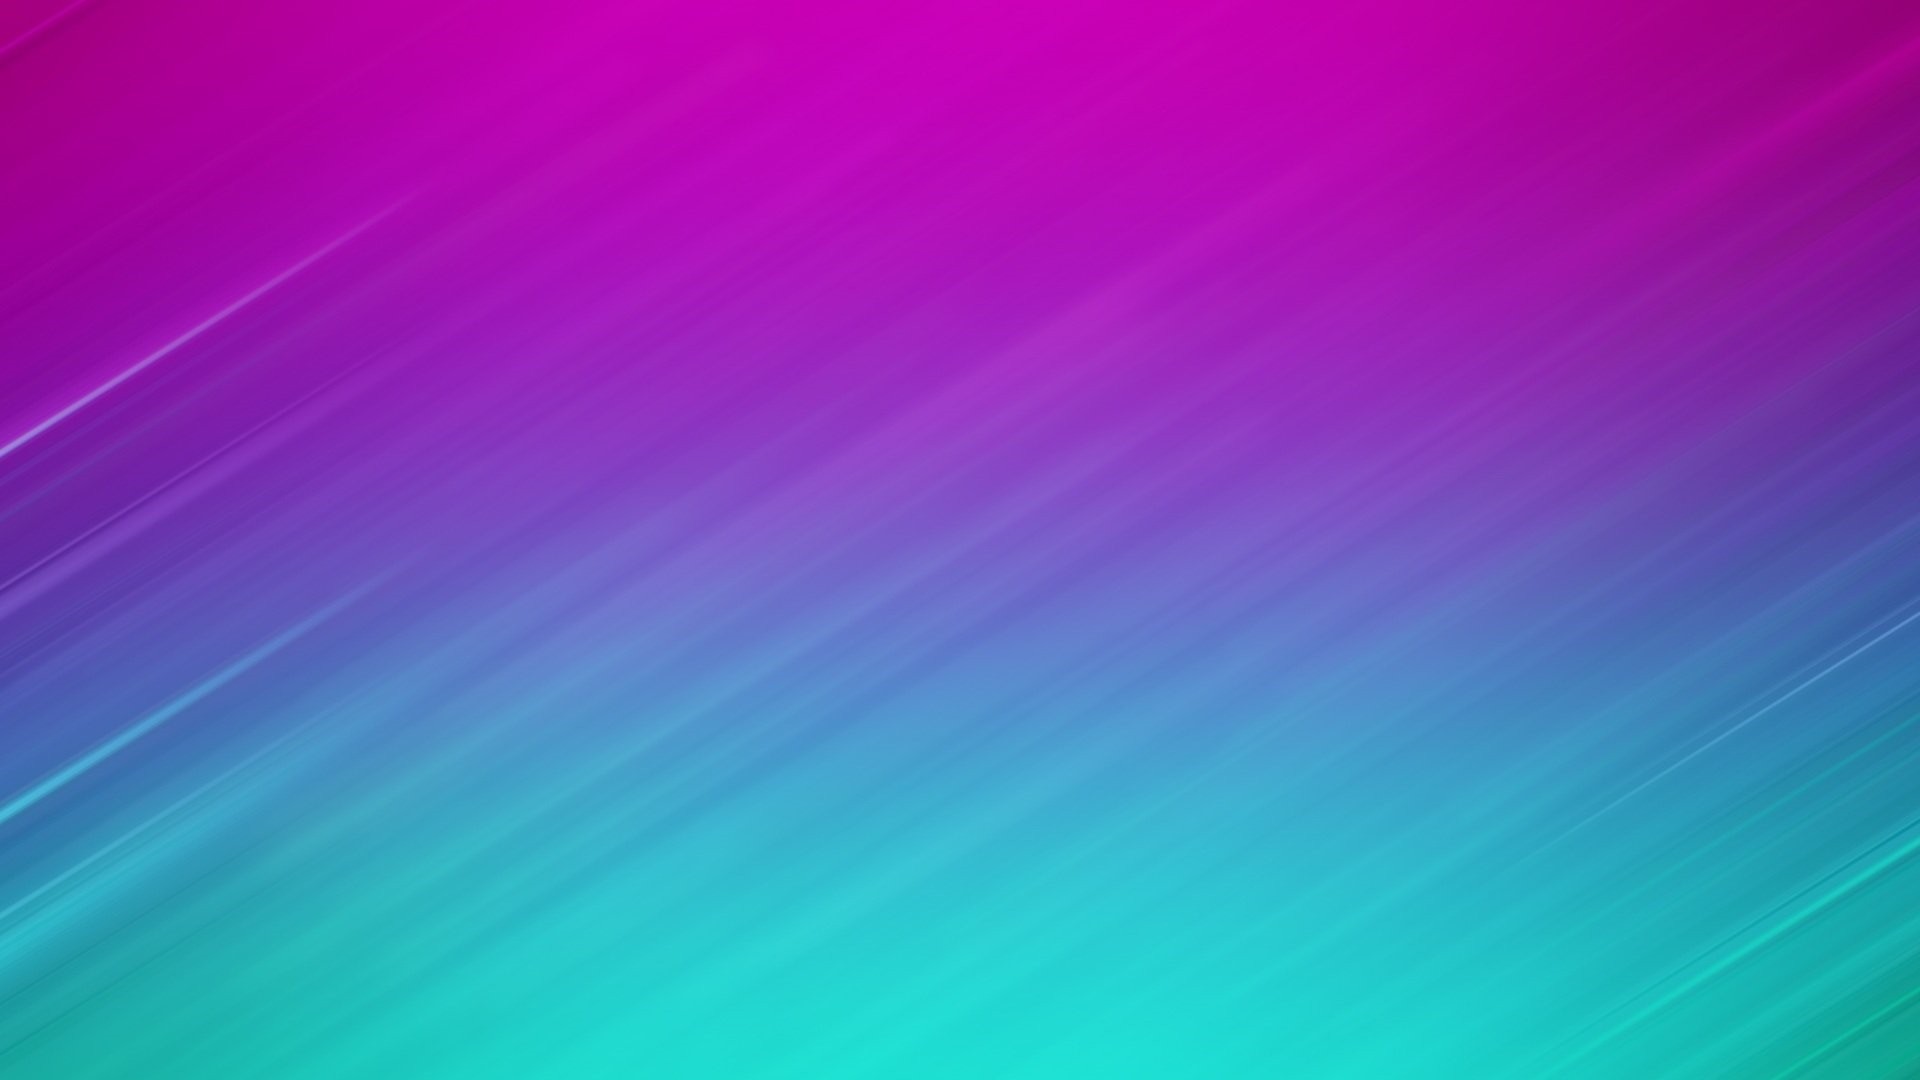 Pink And Blue Background Wallpaper